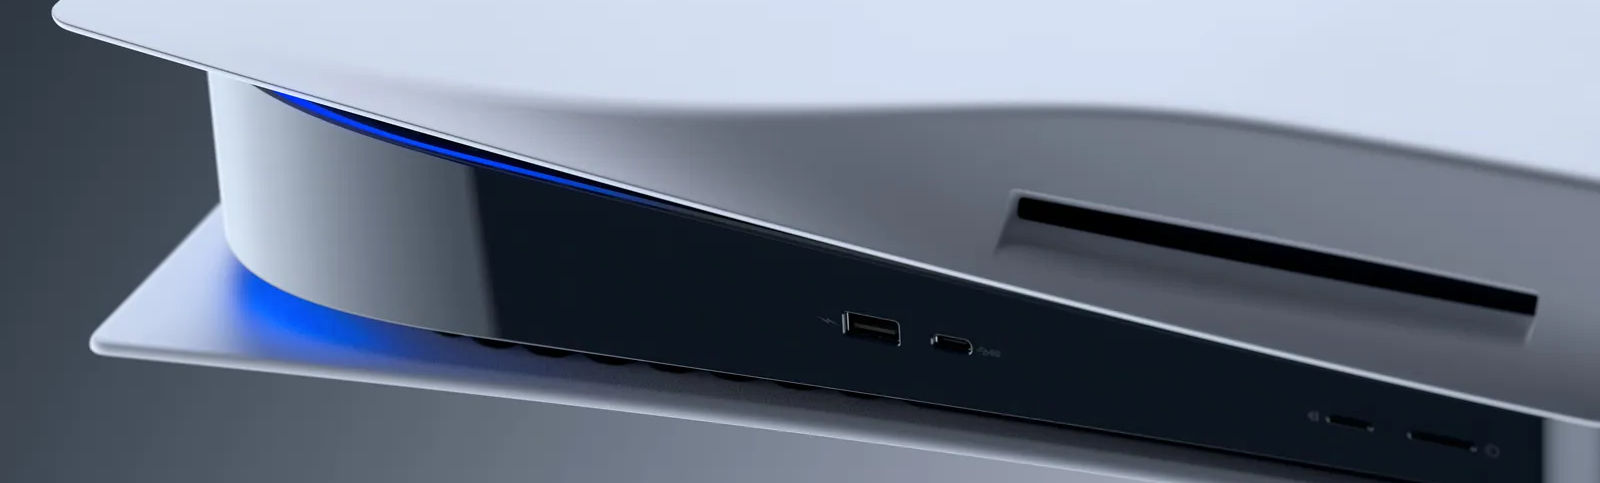 PlayStation 5 Slim teardowns show changes to cooling and the